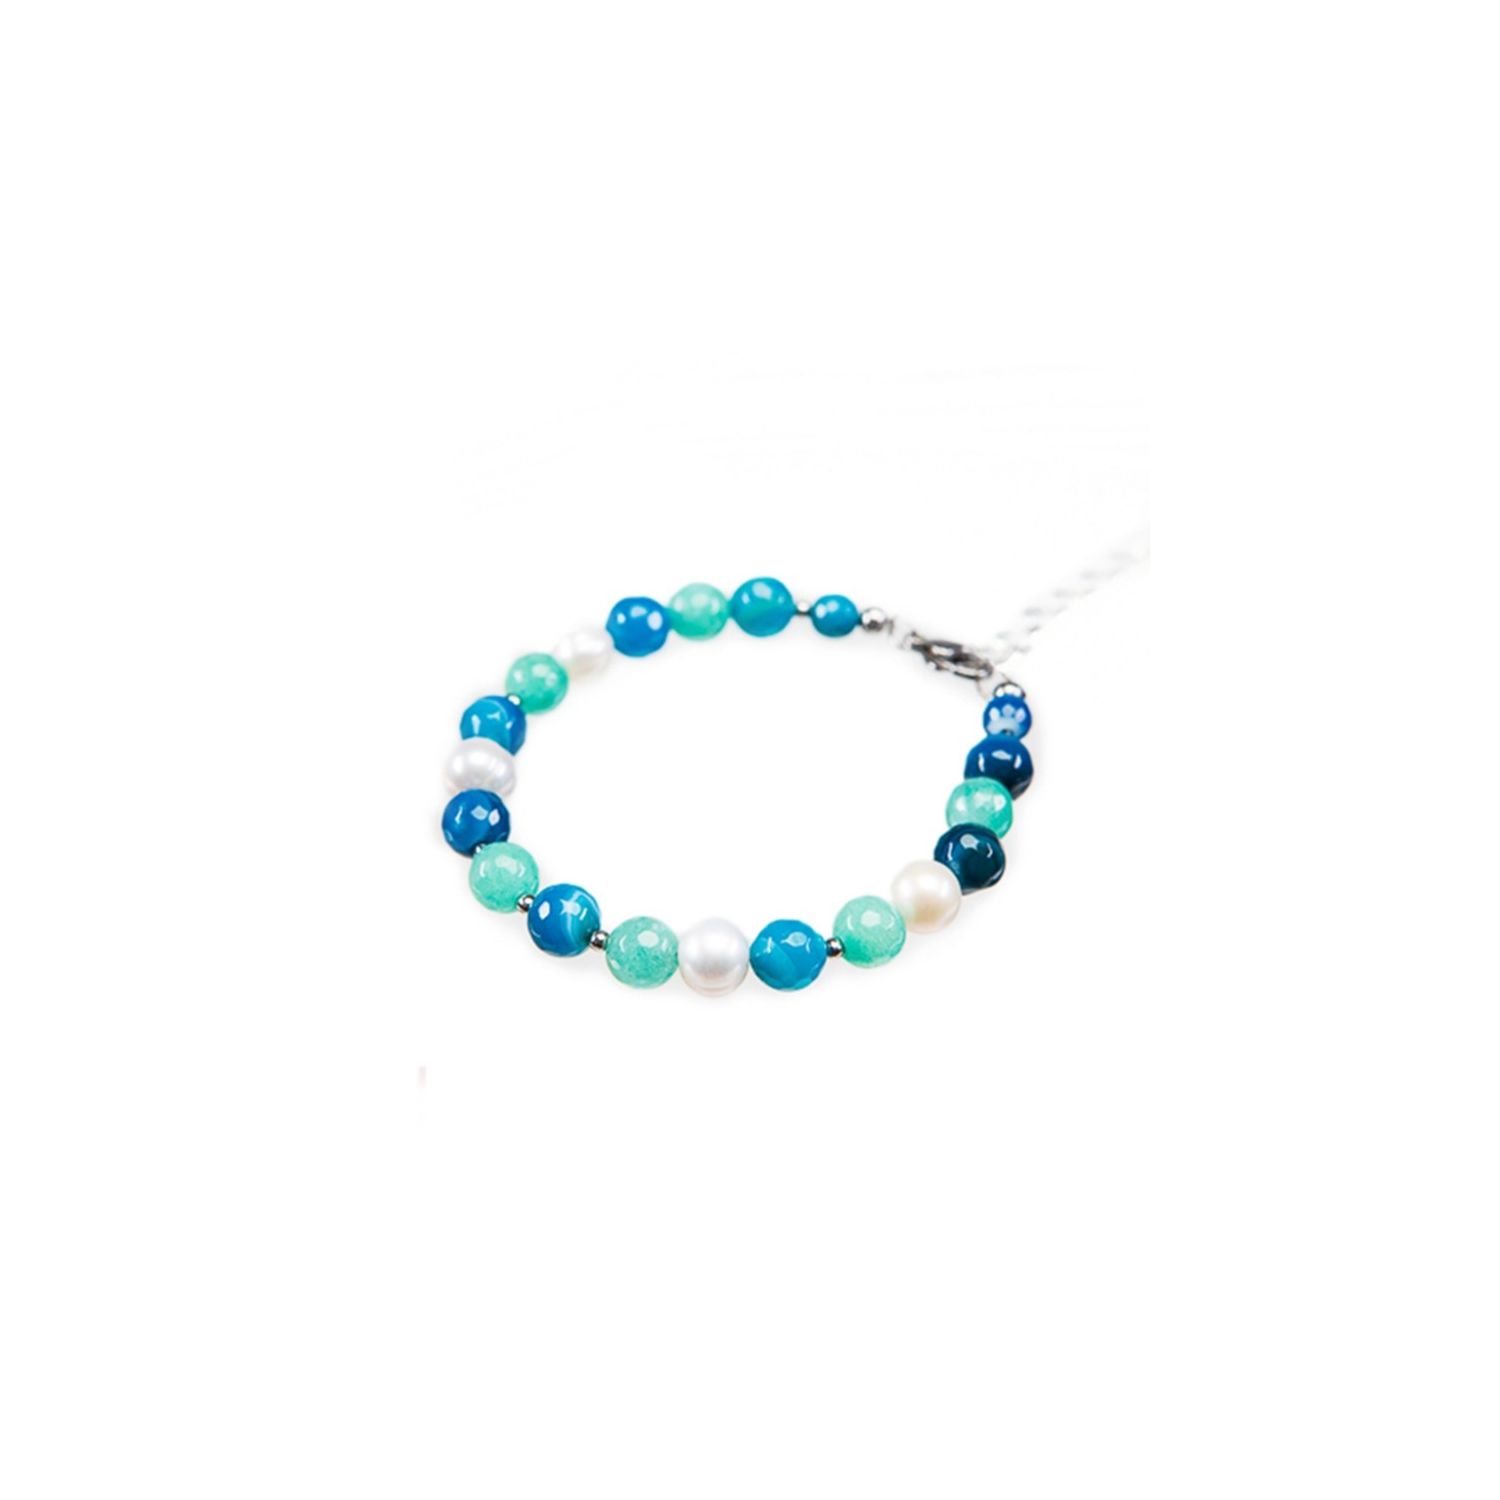 Blue agate bracelet, turquoise and pearls